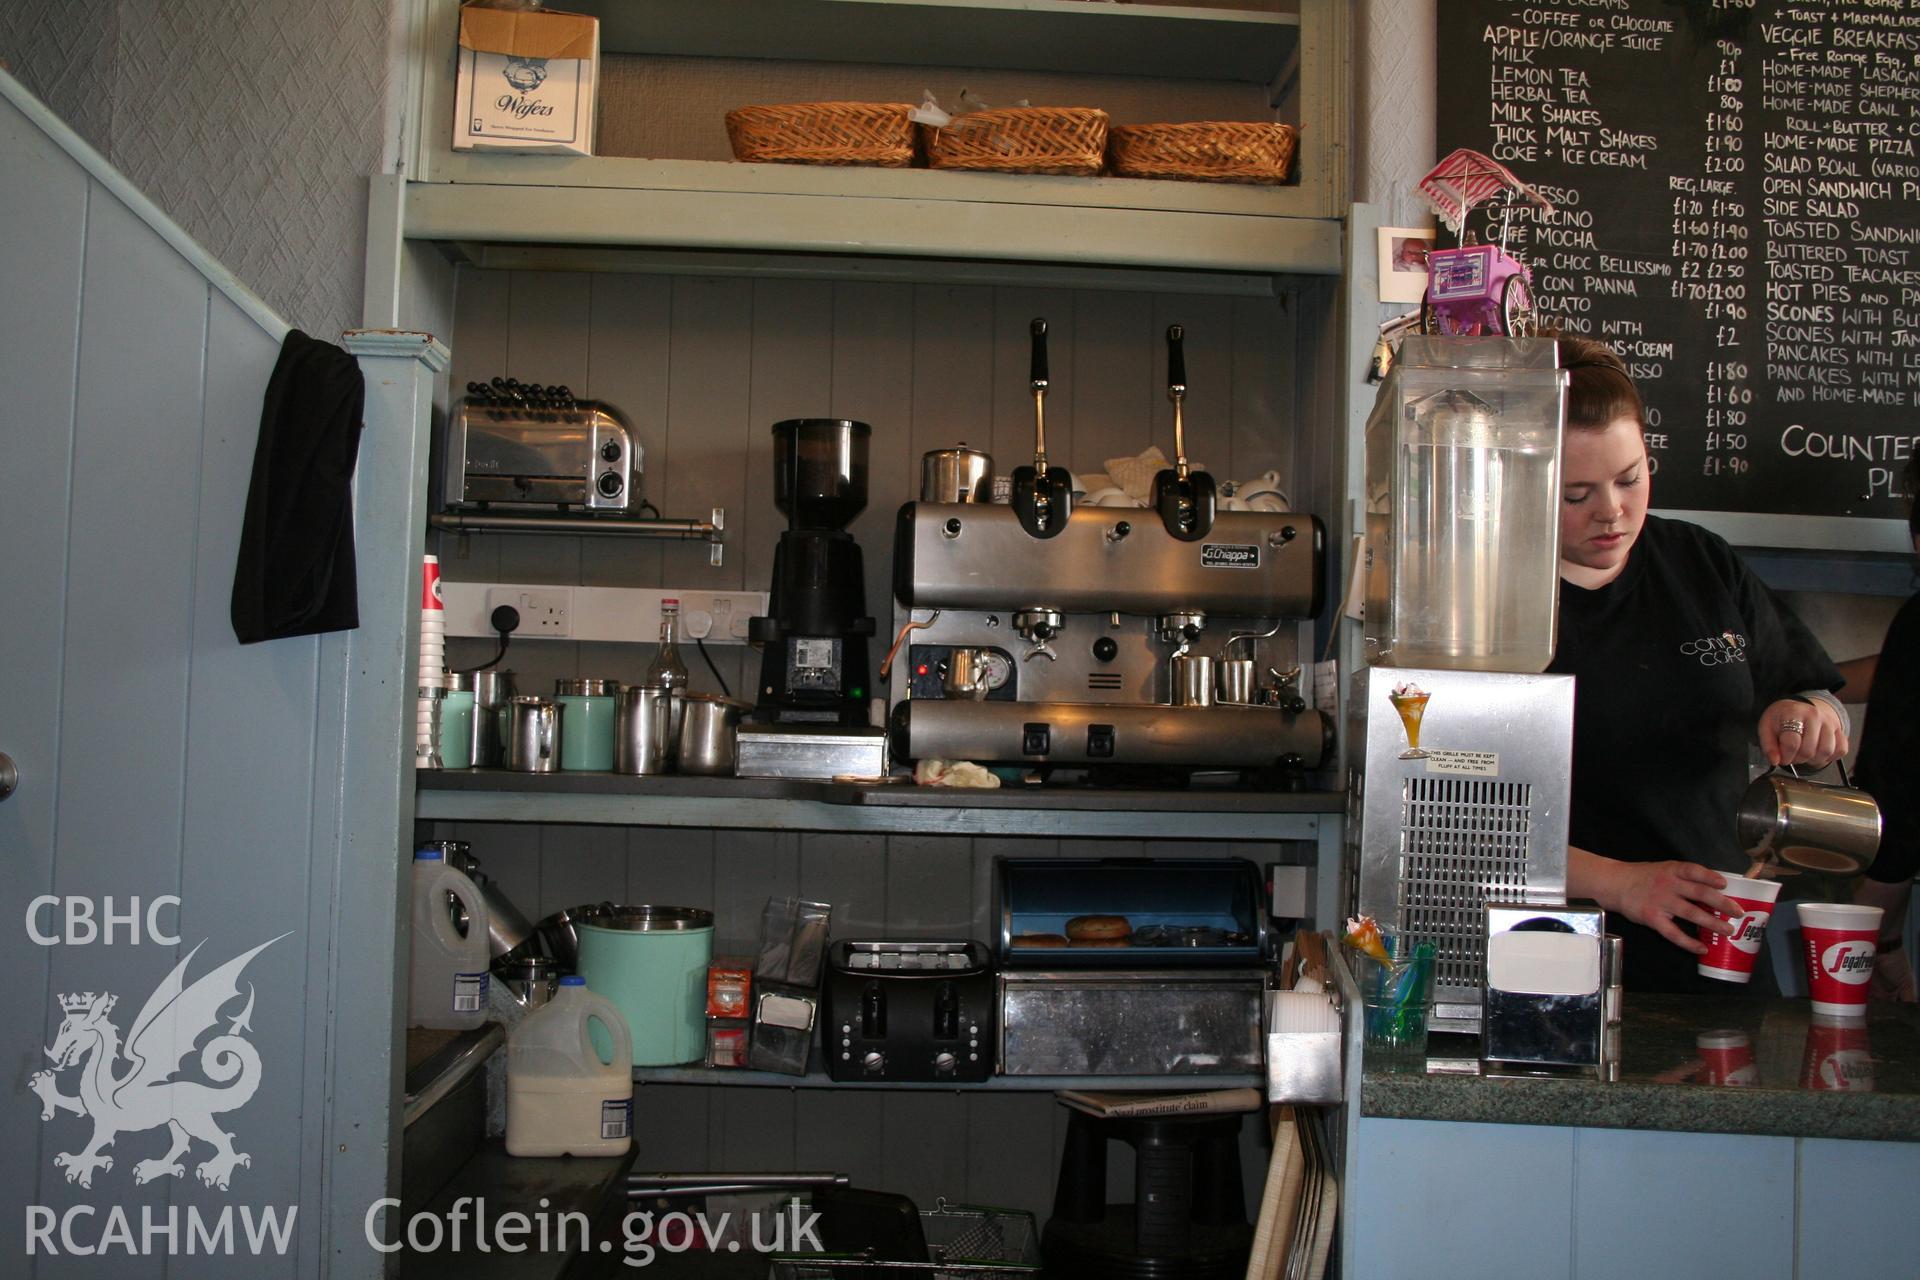 Contis Cafe, 5 Harford Square,Lampeter, coffee machine and serving area.